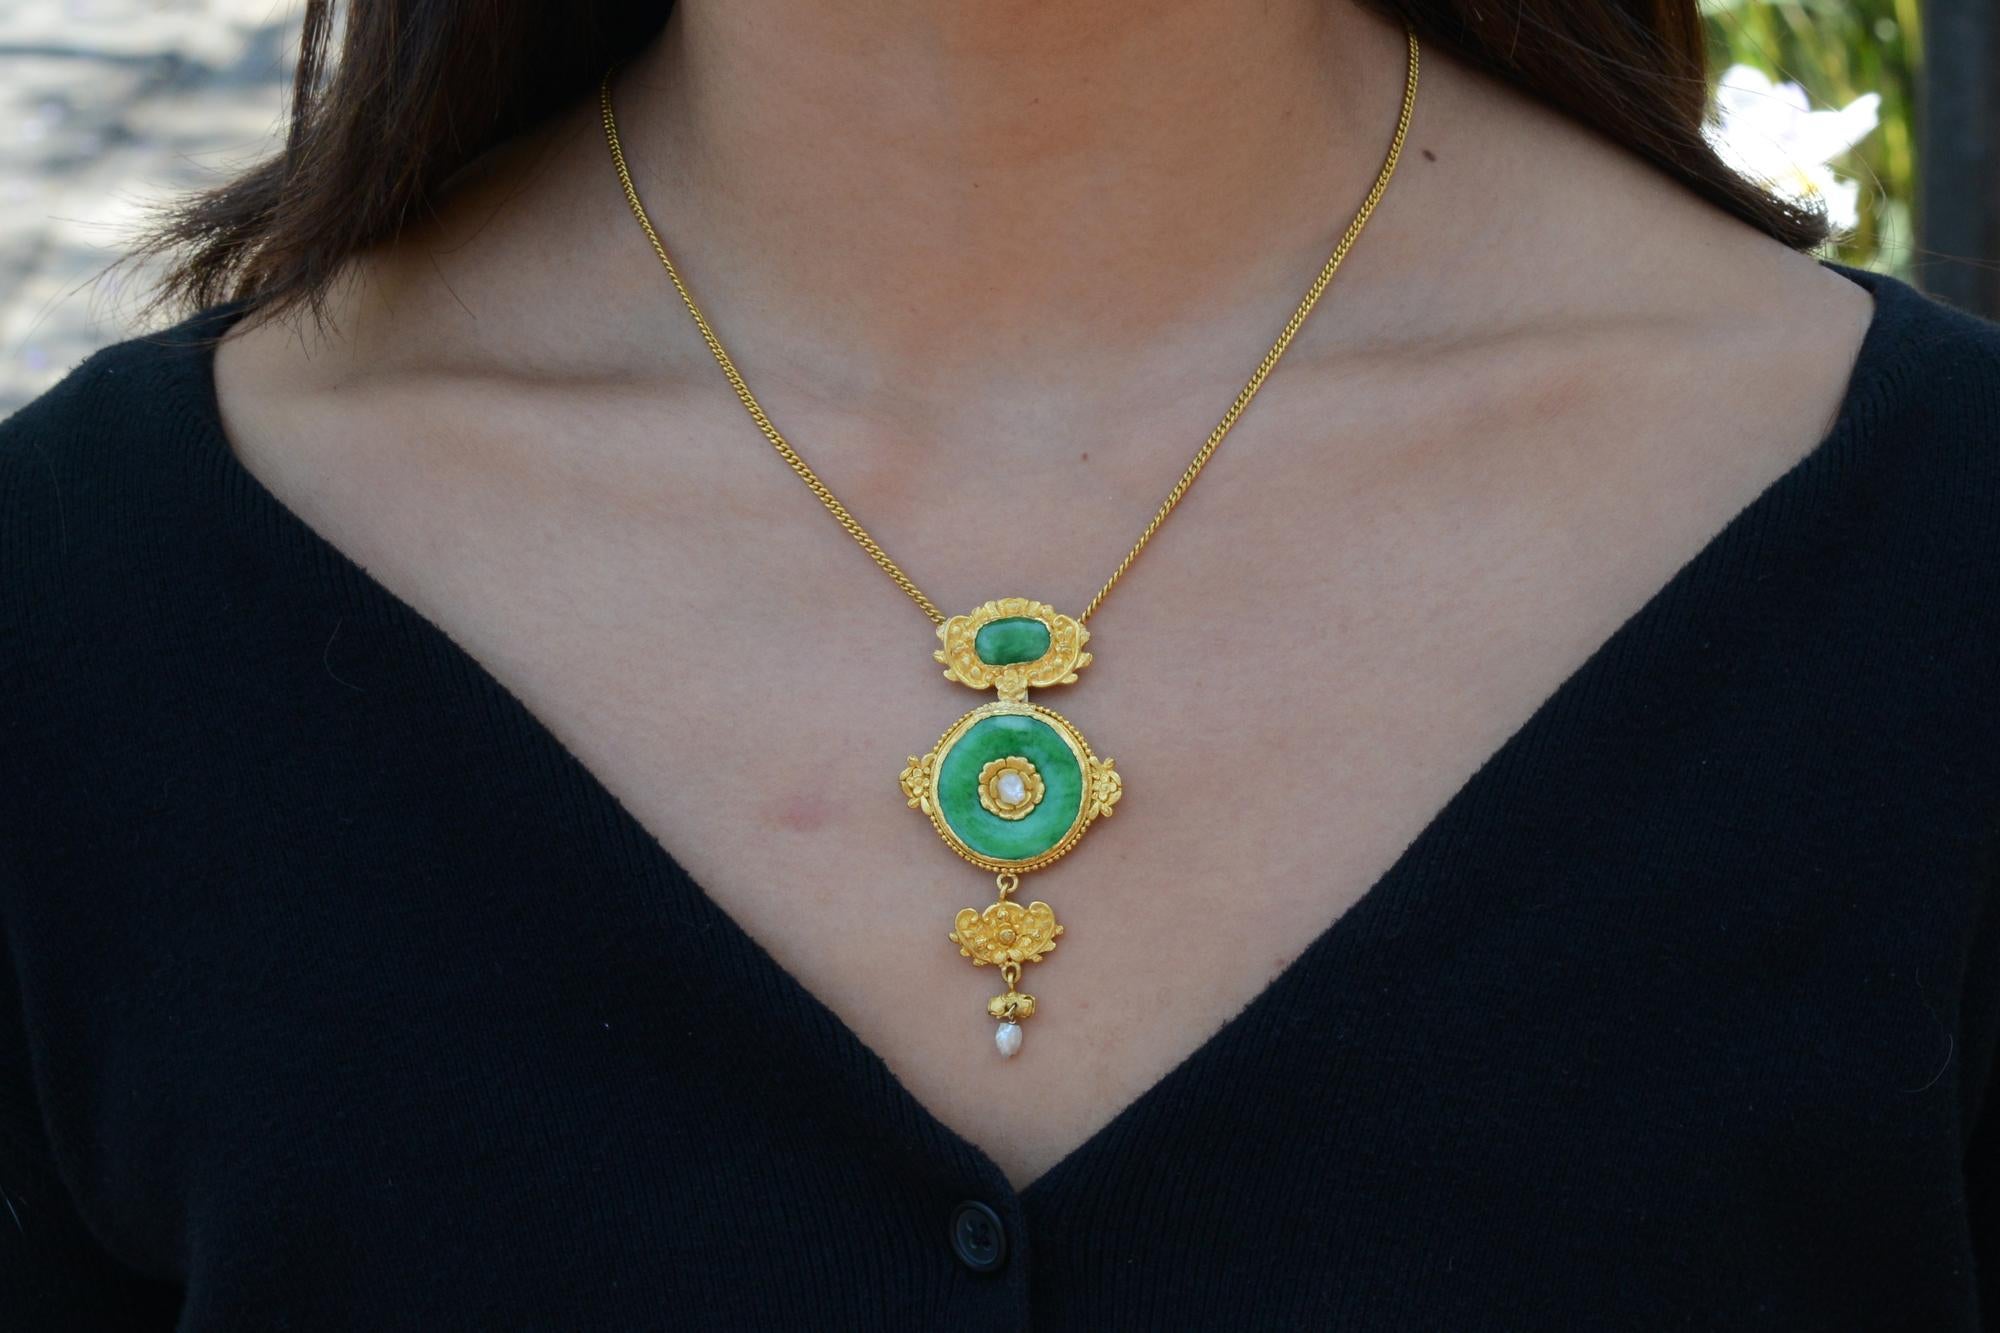 This early 1900s Art Nouveau pendant features vivacious natural Jadeite, accented with a pair of seed pearls and expertly crafted floral motifs typical of the era. We love the hefty weight of over one ounce of pure and rich 24 karat yellow gold.